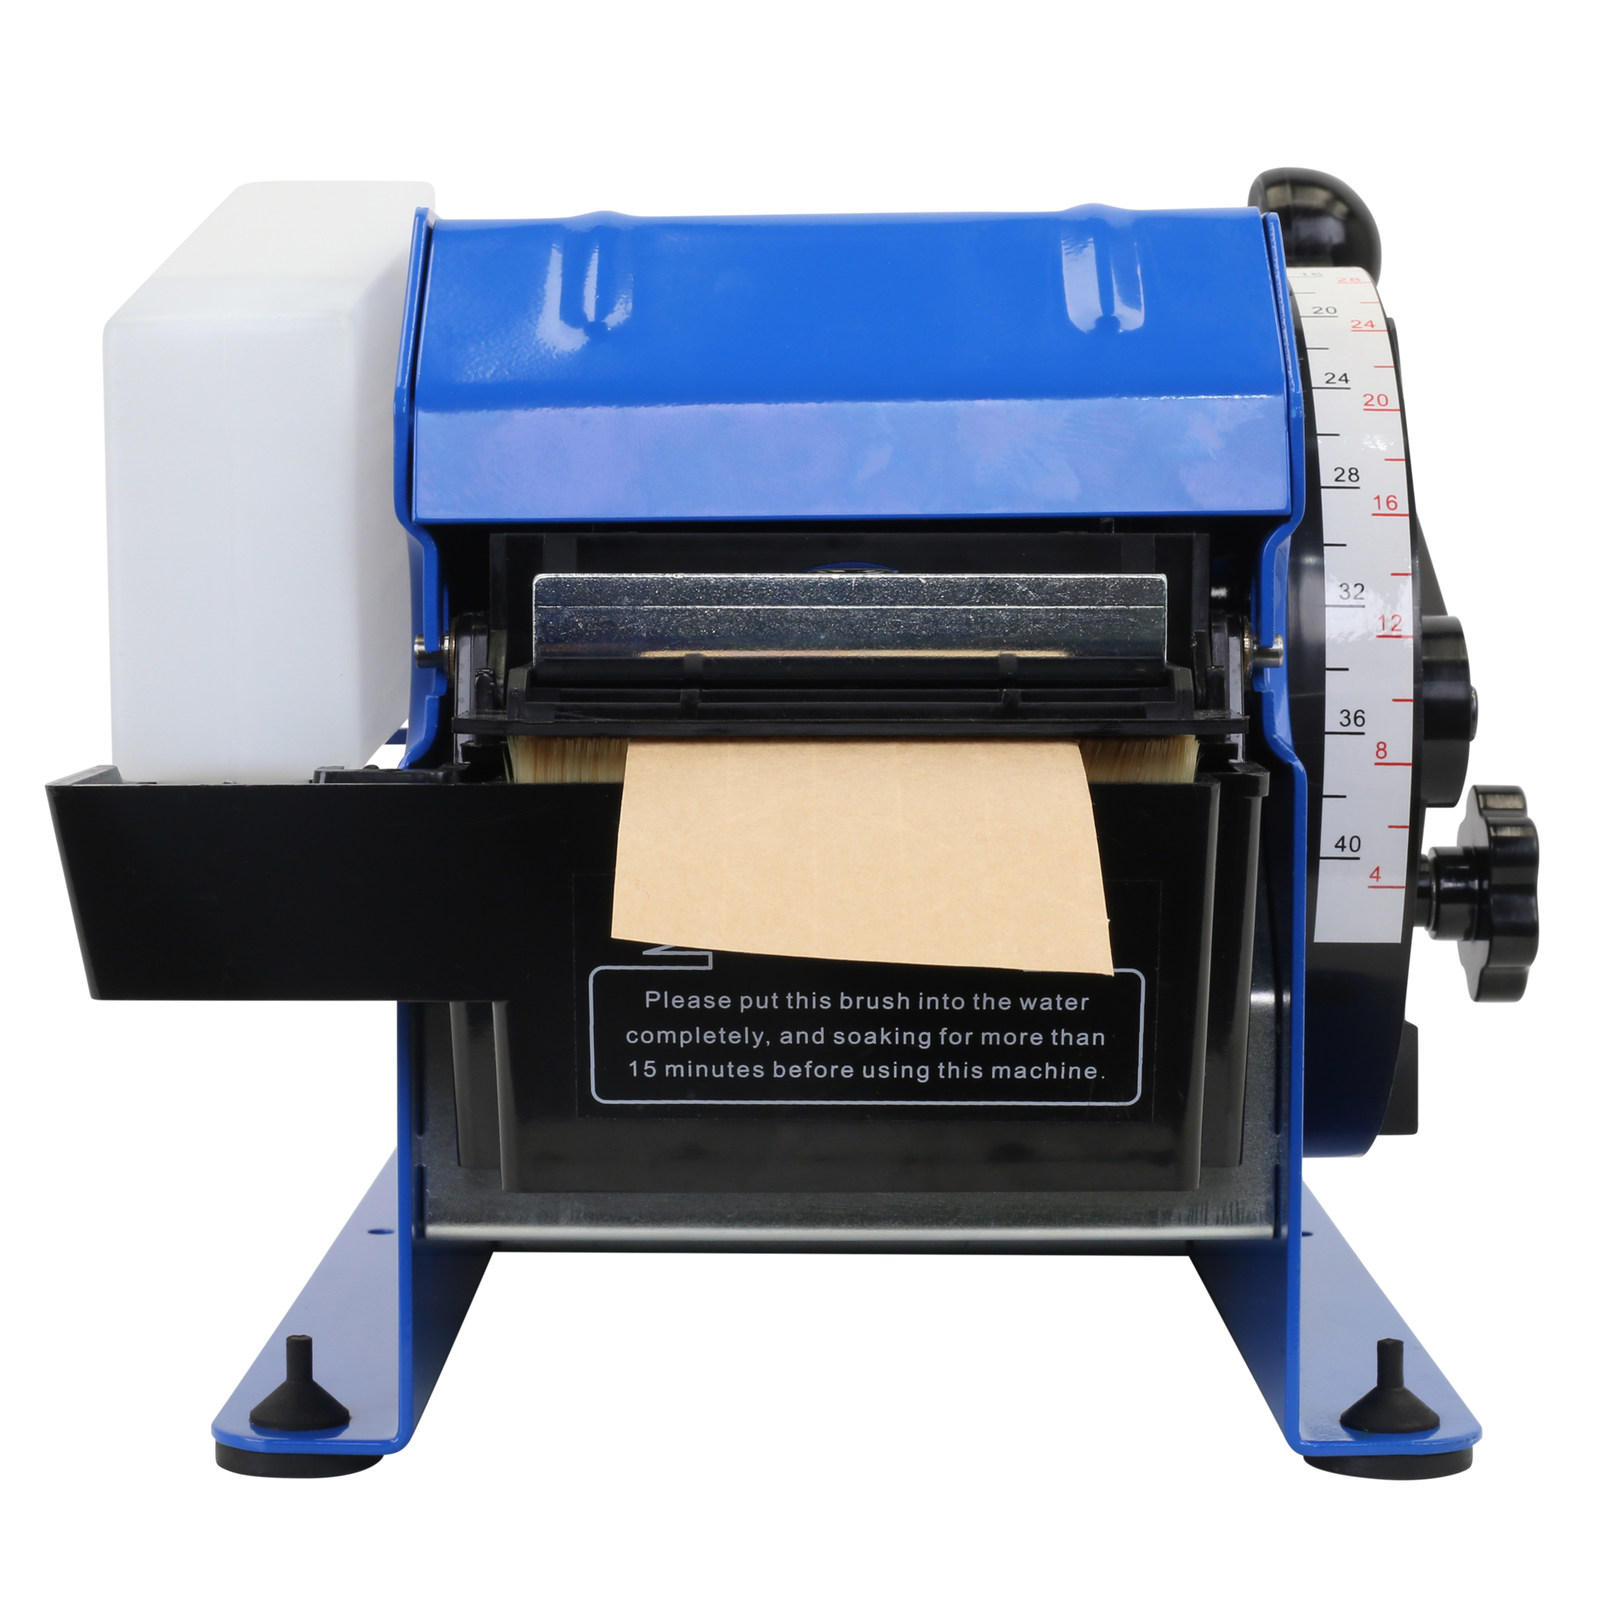 Close up of the JORES TECHNOLOGIES® gummed tape dispensed showing the white water container on the left, the exit of the kraft paper tape in the middle and the wheel to set the size of the tape on the right side of the machine